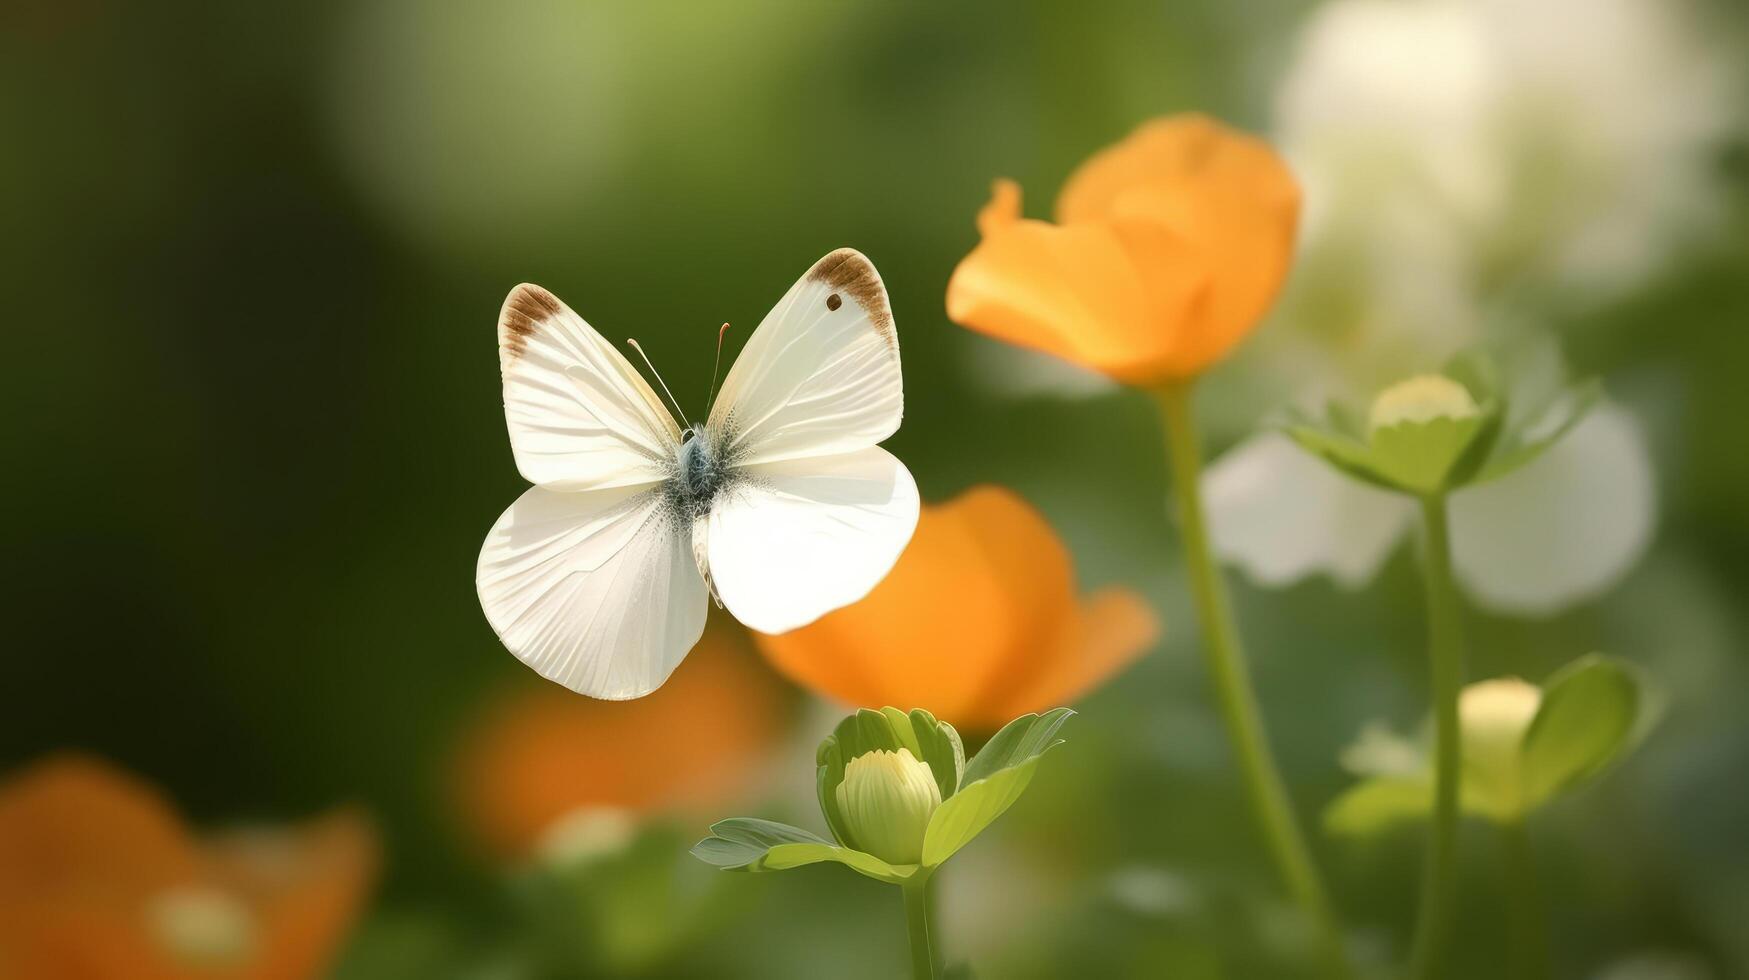 Anemone flower with butterfly. Illustration photo